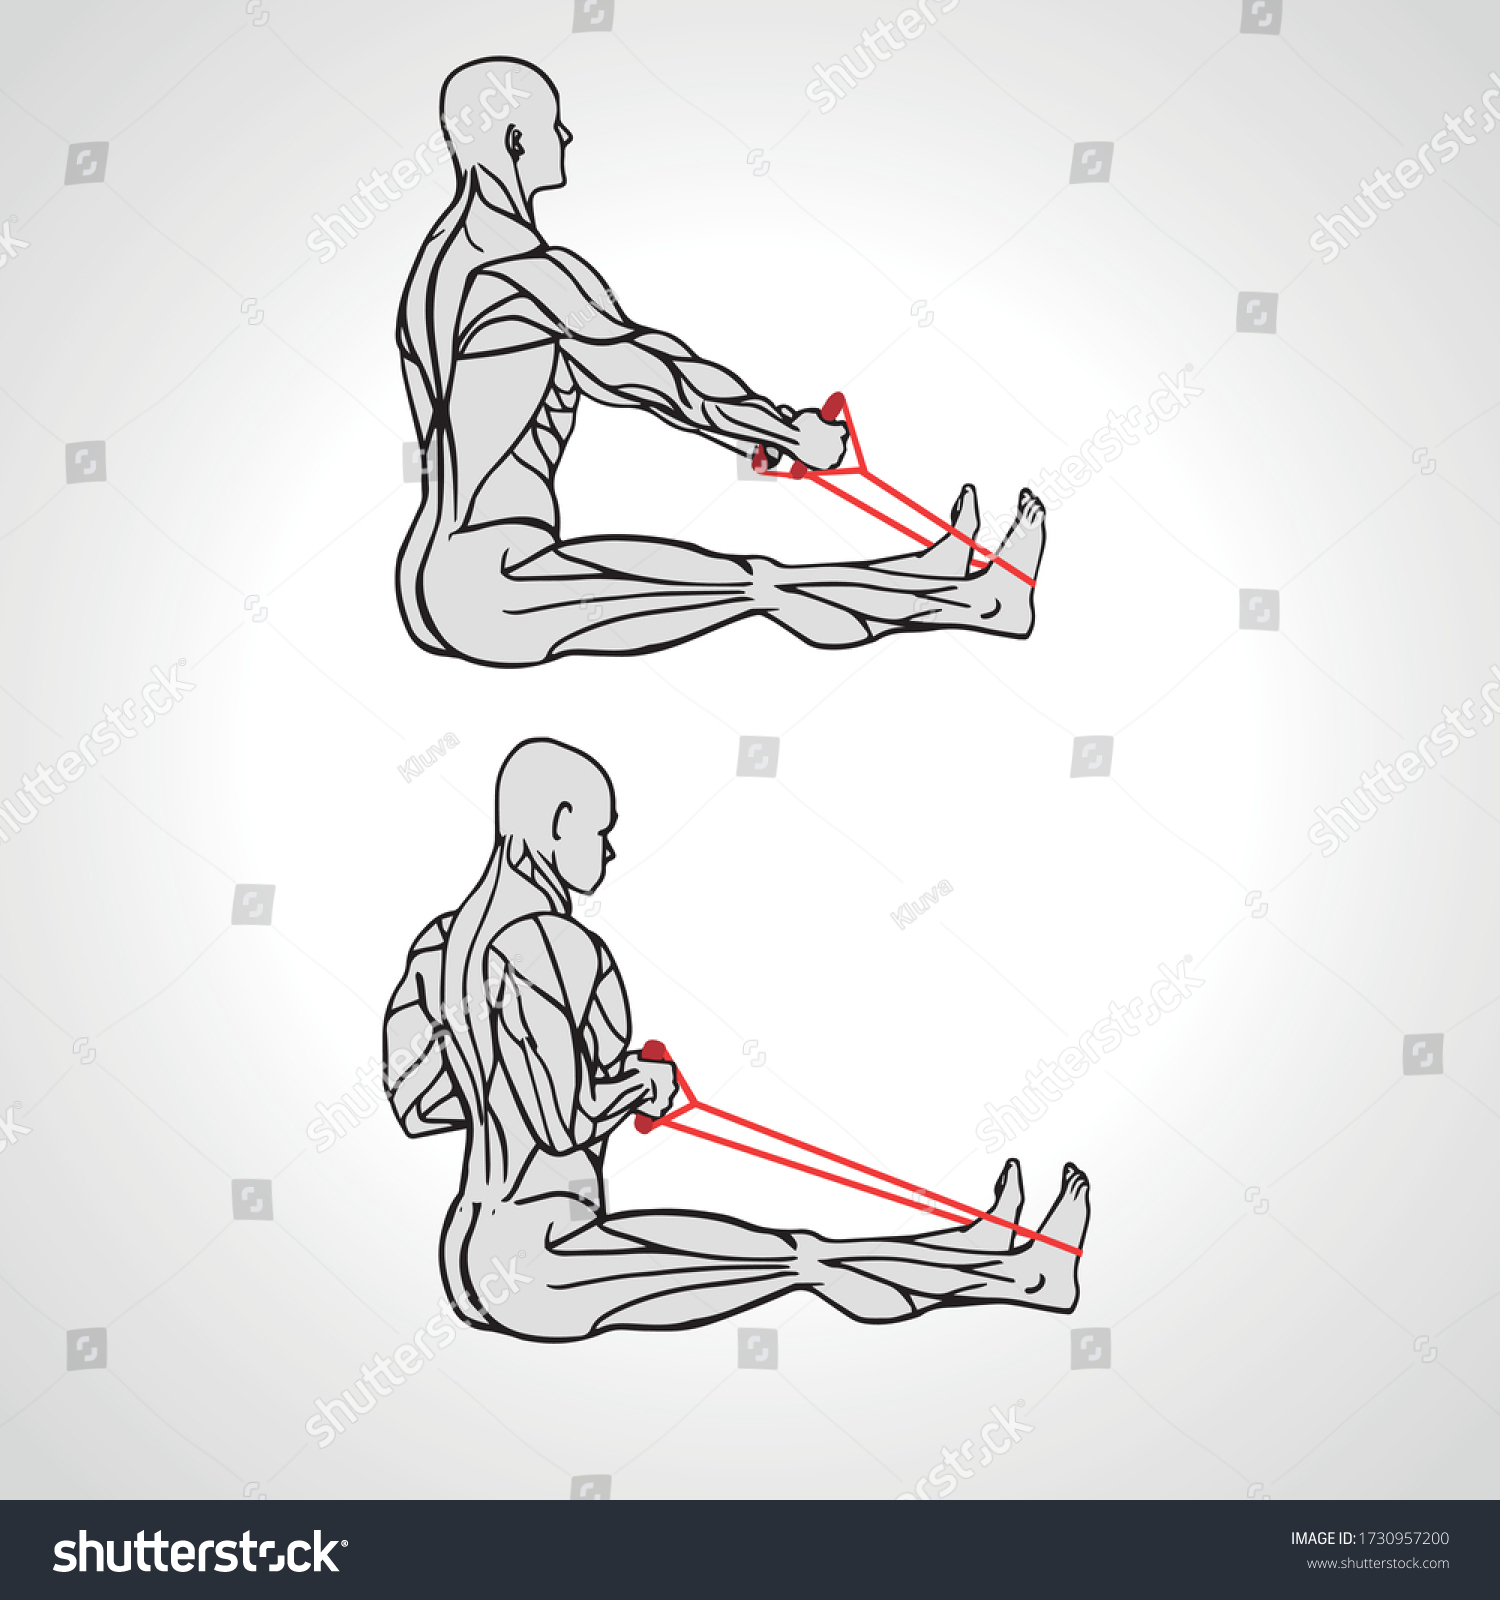 SVG of Resistance Band Upper Back Row exercise At home Bodyweight Workout Musculus scheme. Vector illustration eps10 svg